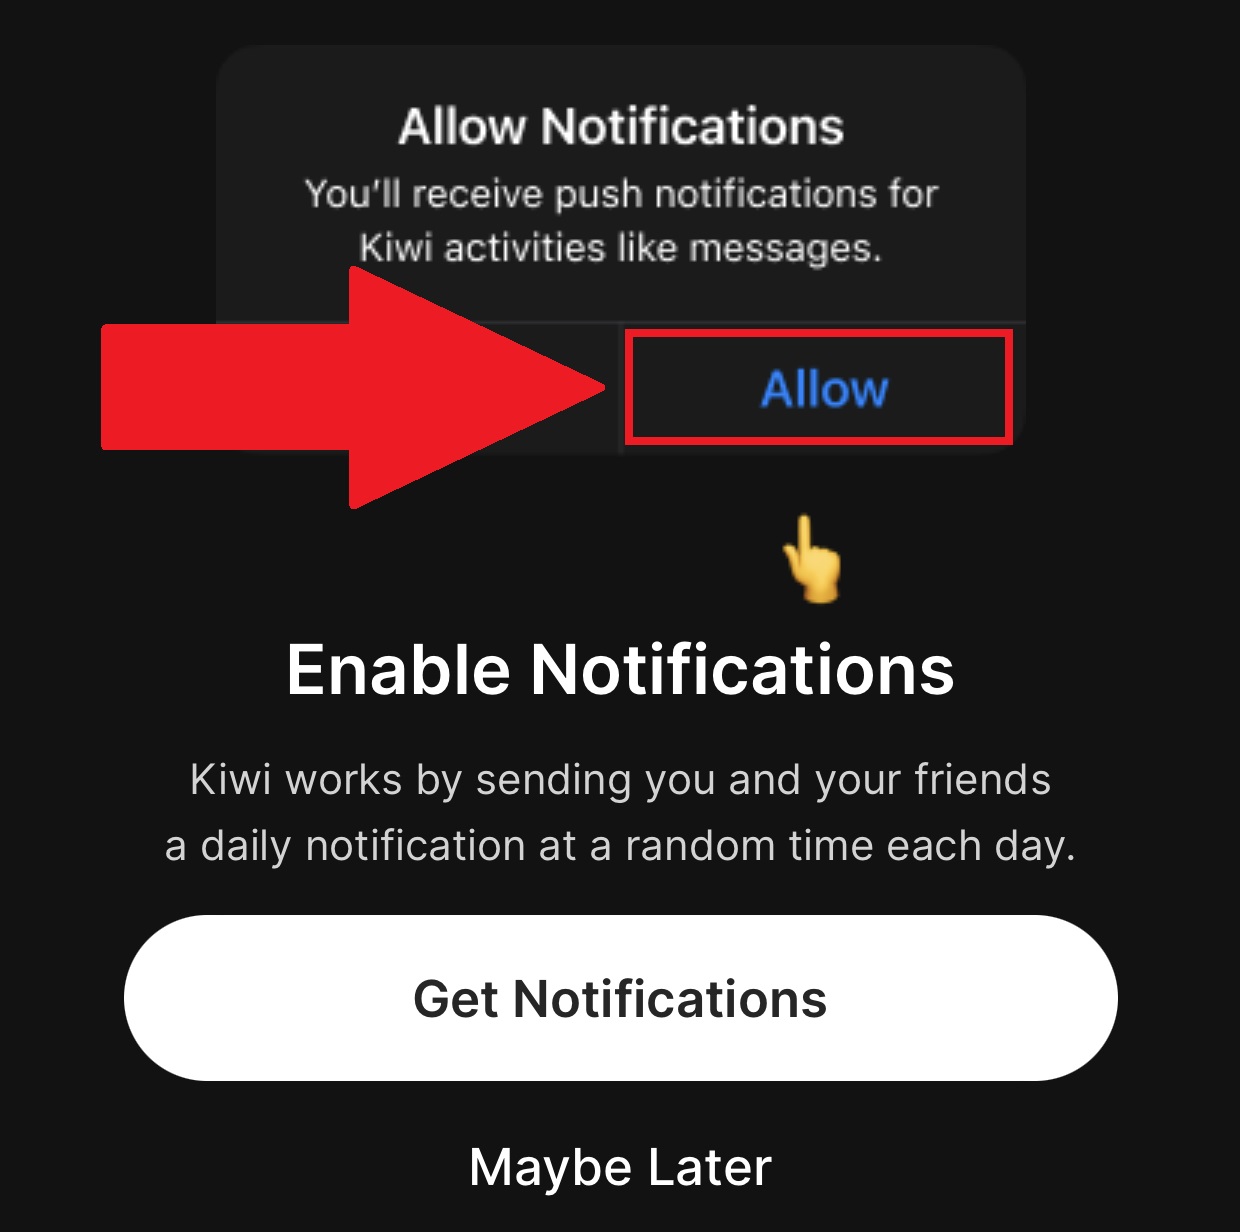 It is important that you allow notifications to be sent so you can be prompted for posting on Kiwi.